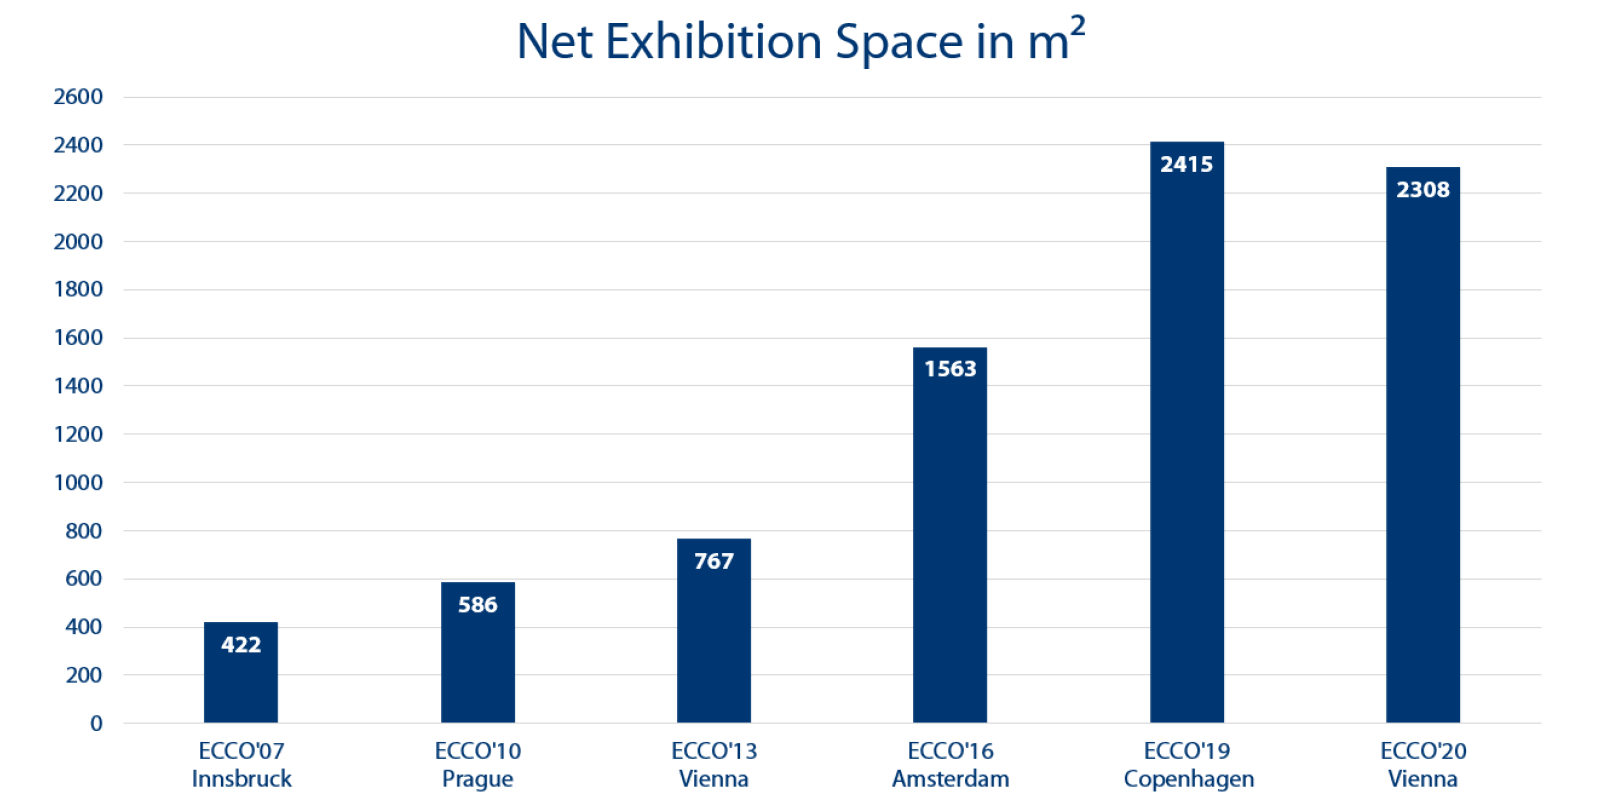 Net exhibition space in m²